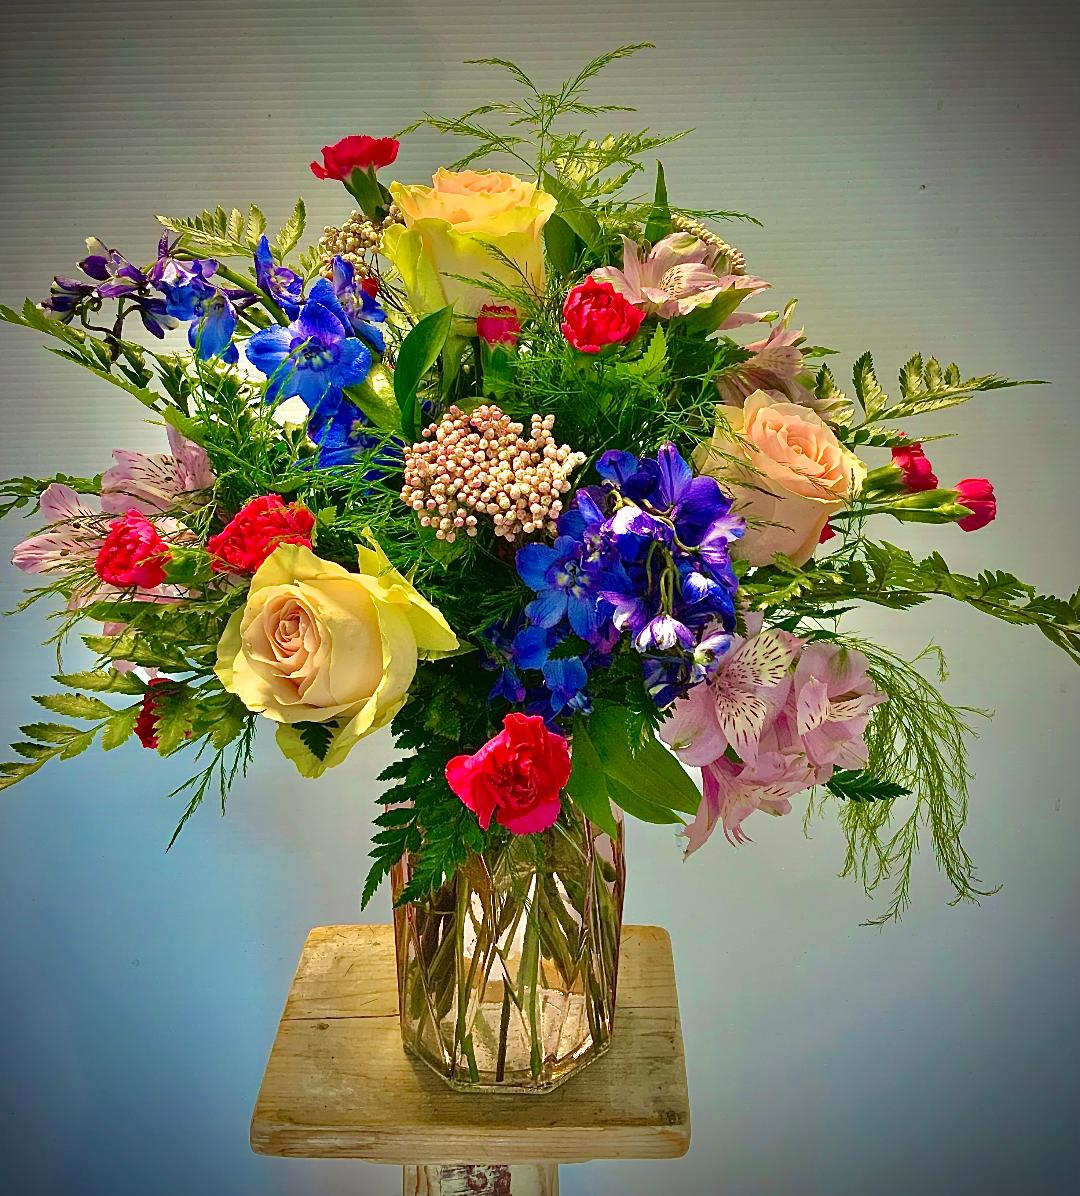 New Love? Standard - Pink Roses with Blue Delphinium and Pink Rice Flower are the main feature of this perfect arrangement for the new love in your life, or the love of your life!